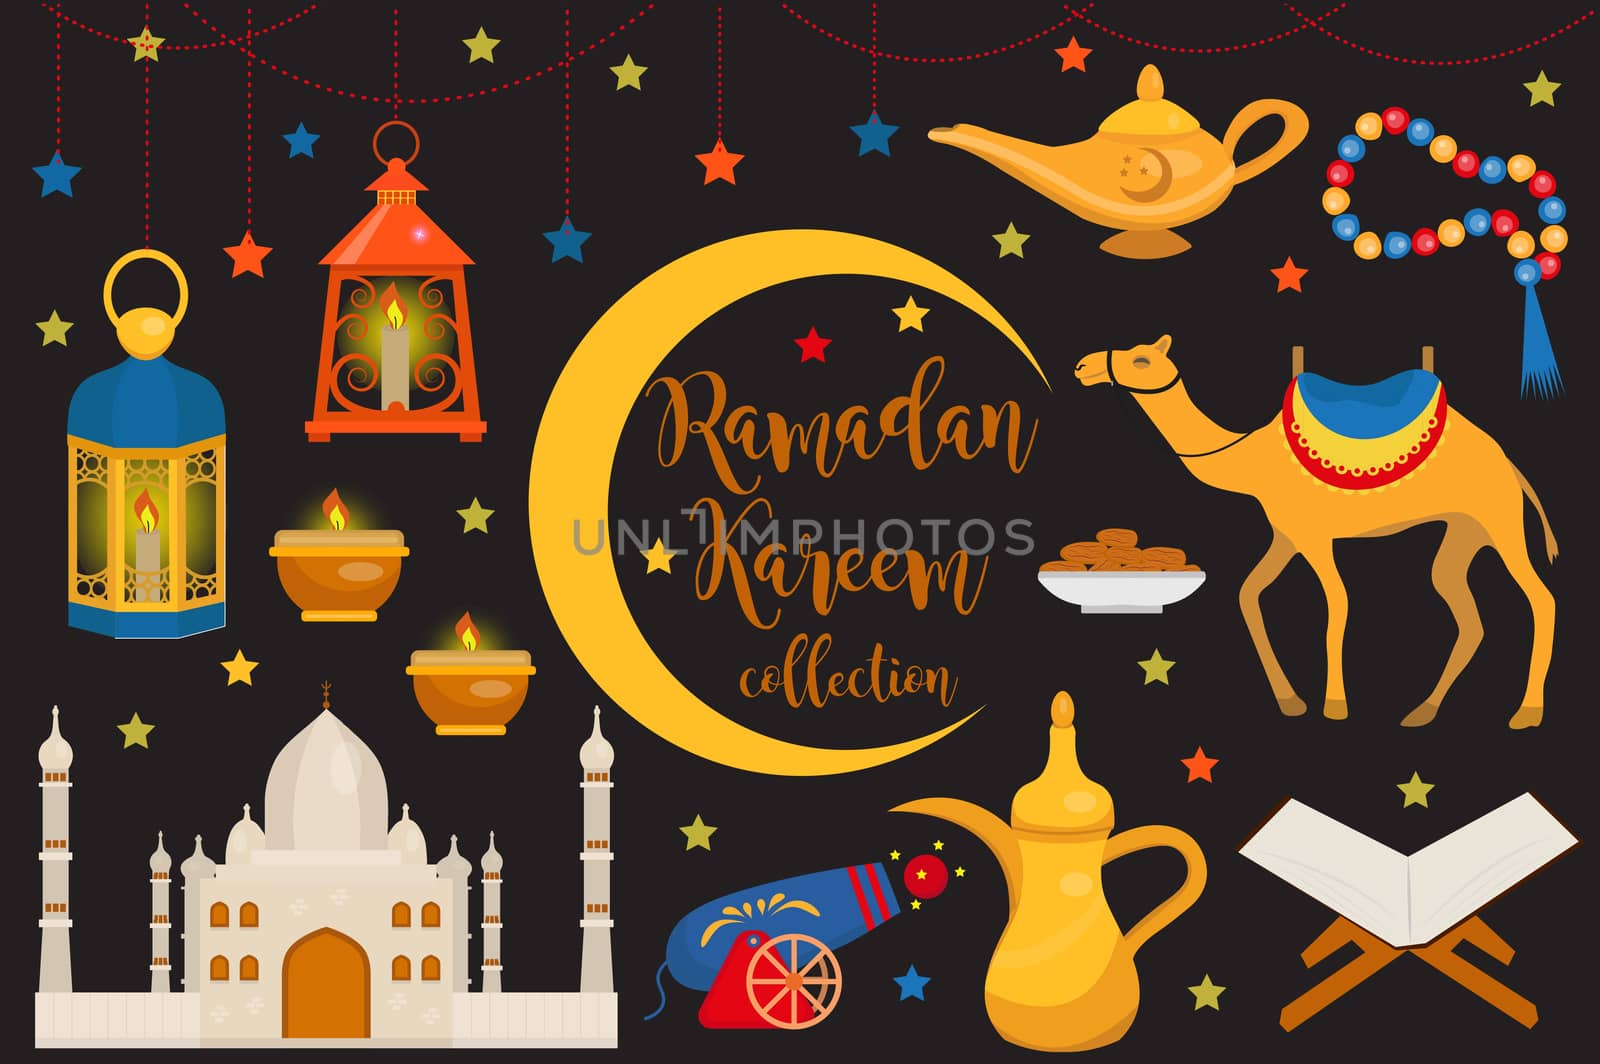 Ramadan kareem flat icon set, cartoon style. Collection of arabic design elements with camel, quran, lanterns, rosary, food, mosque. illustration. by lucia_fox